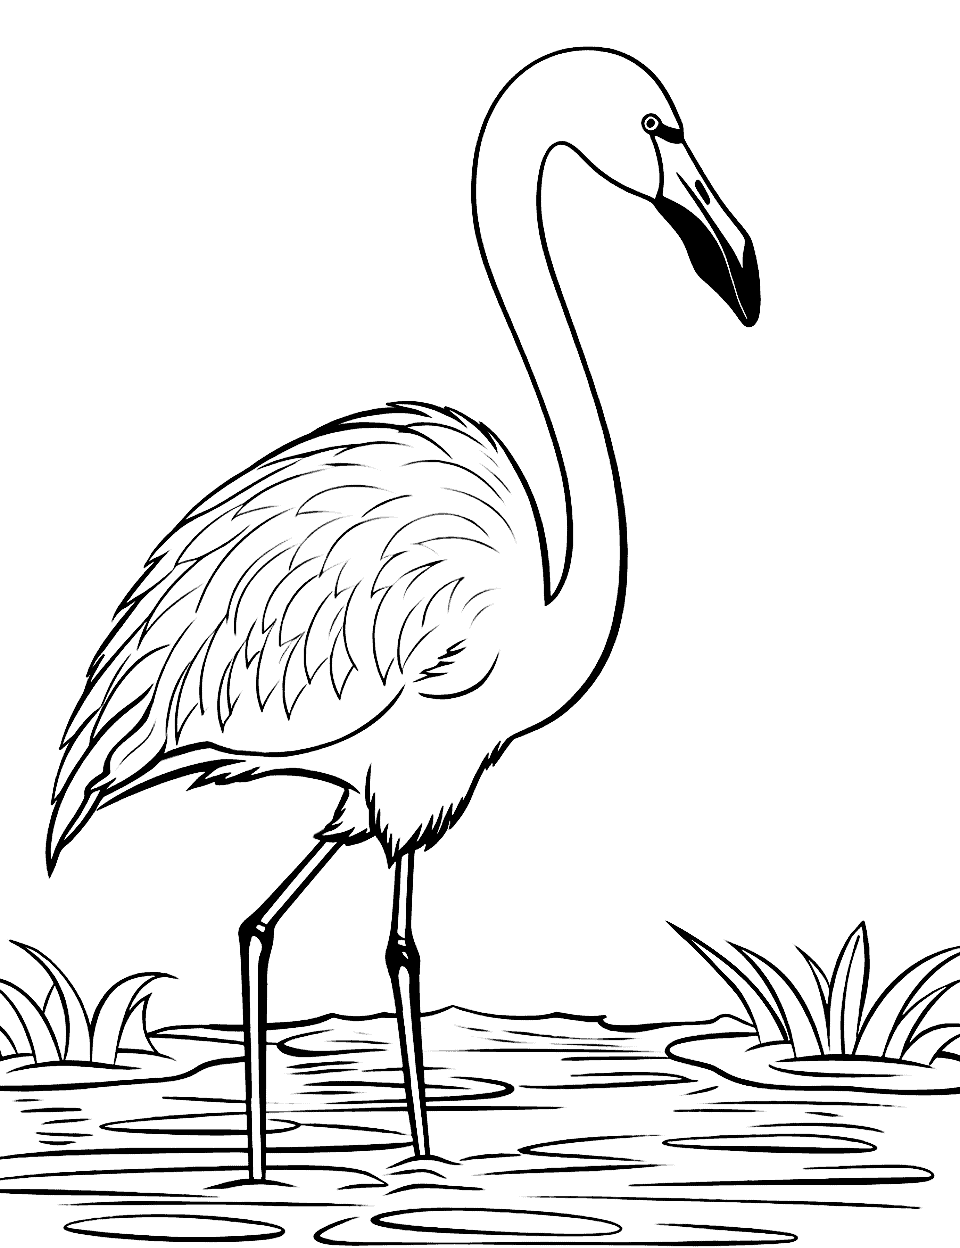 Cute Flamingo Standing by a Pond Coloring Page - A charming, cute flamingo standing beside a small pond.